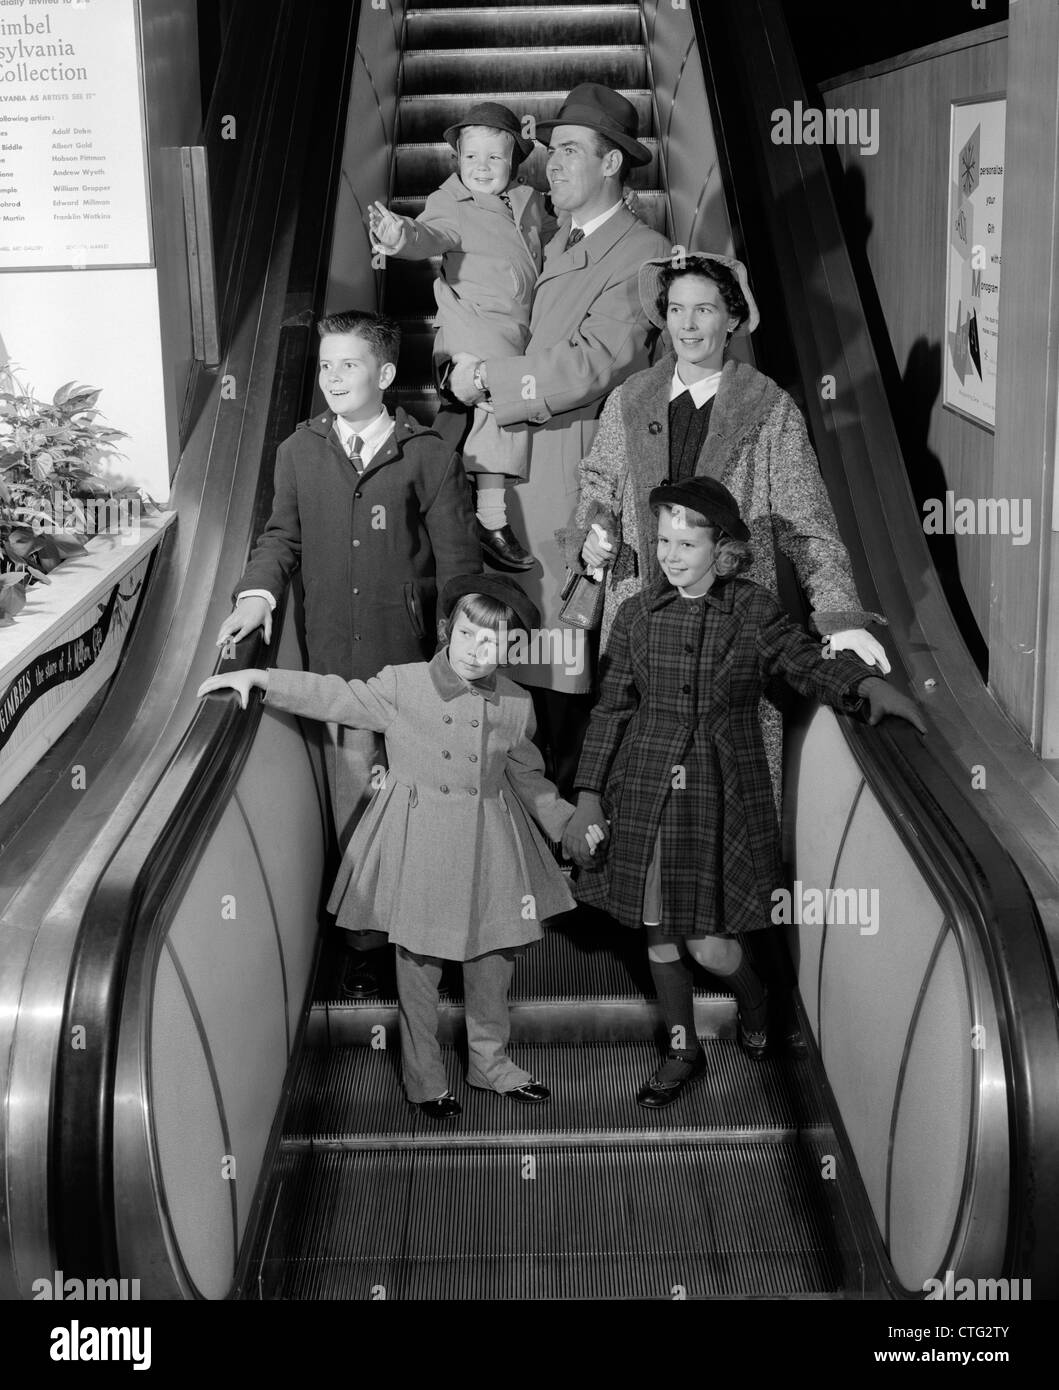 1950s SMILING FAMILY OF 6 IN WINTER COATS GOING DOWN STORE ESCALATOR Stock Photo